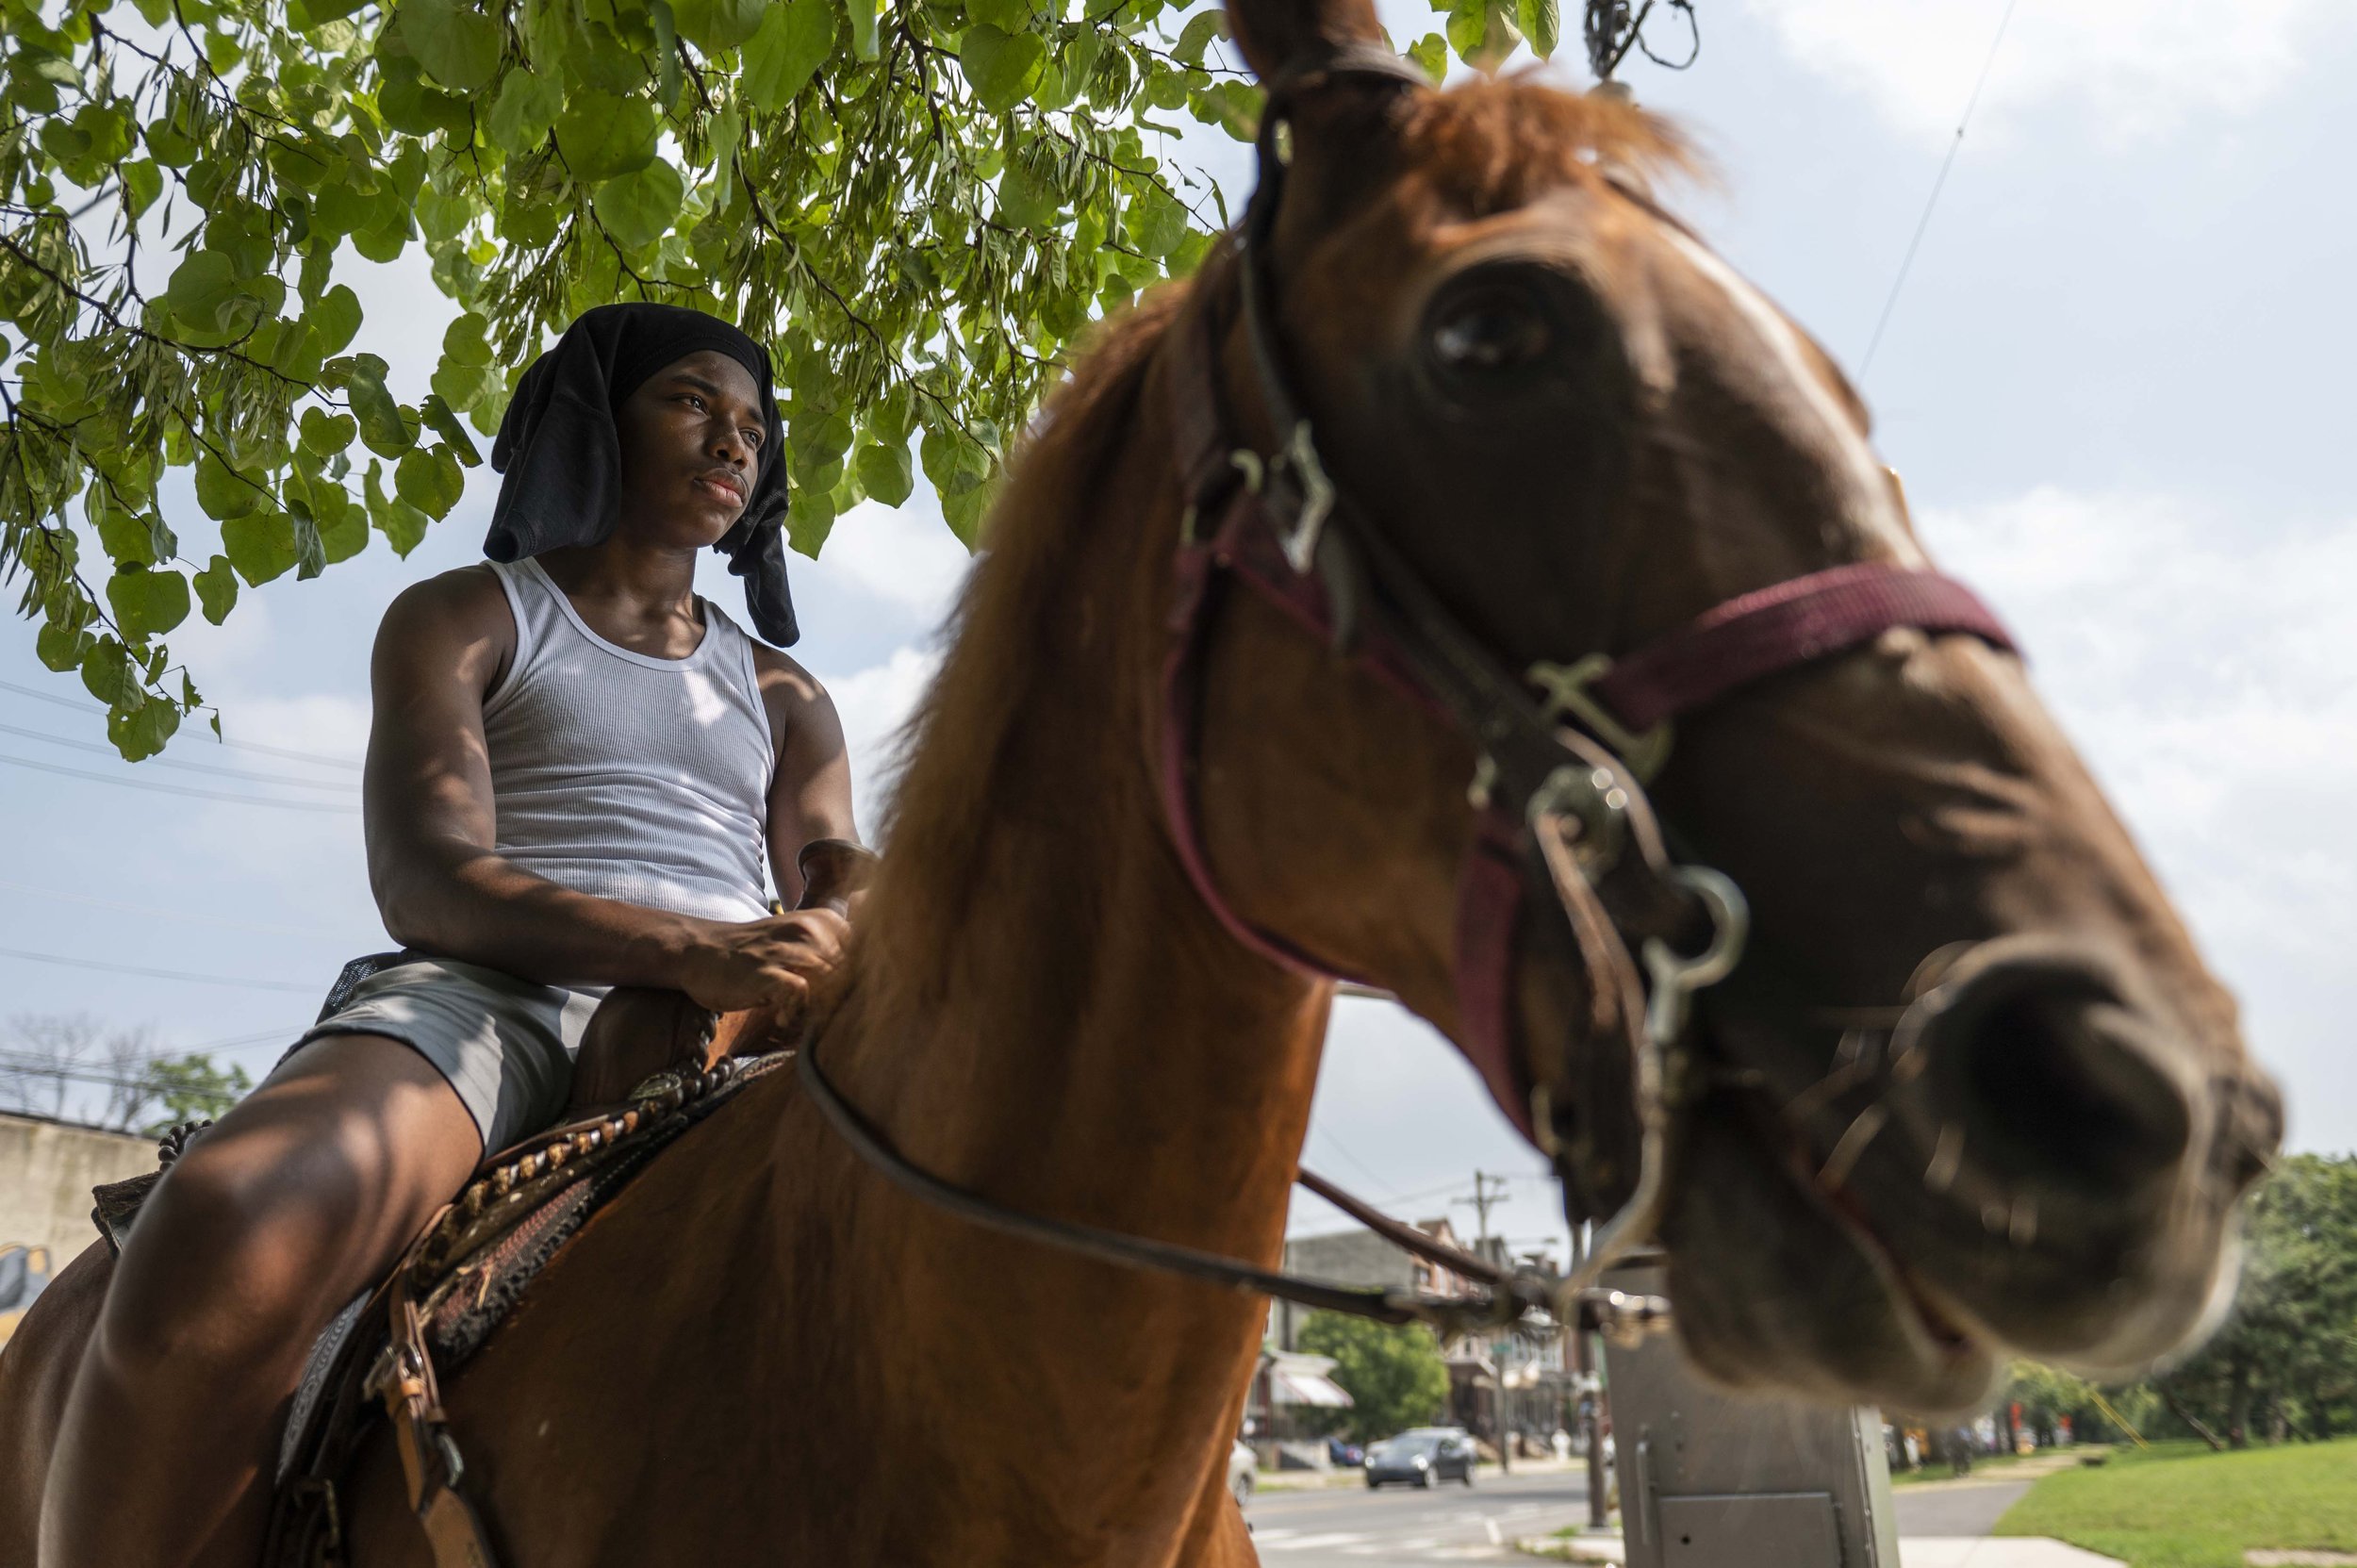   Theron Morris, 15, rides his horse Freida in Strawberry Mansion in Philadelphia, Pa. on Wednesday, July 19, 2023.   